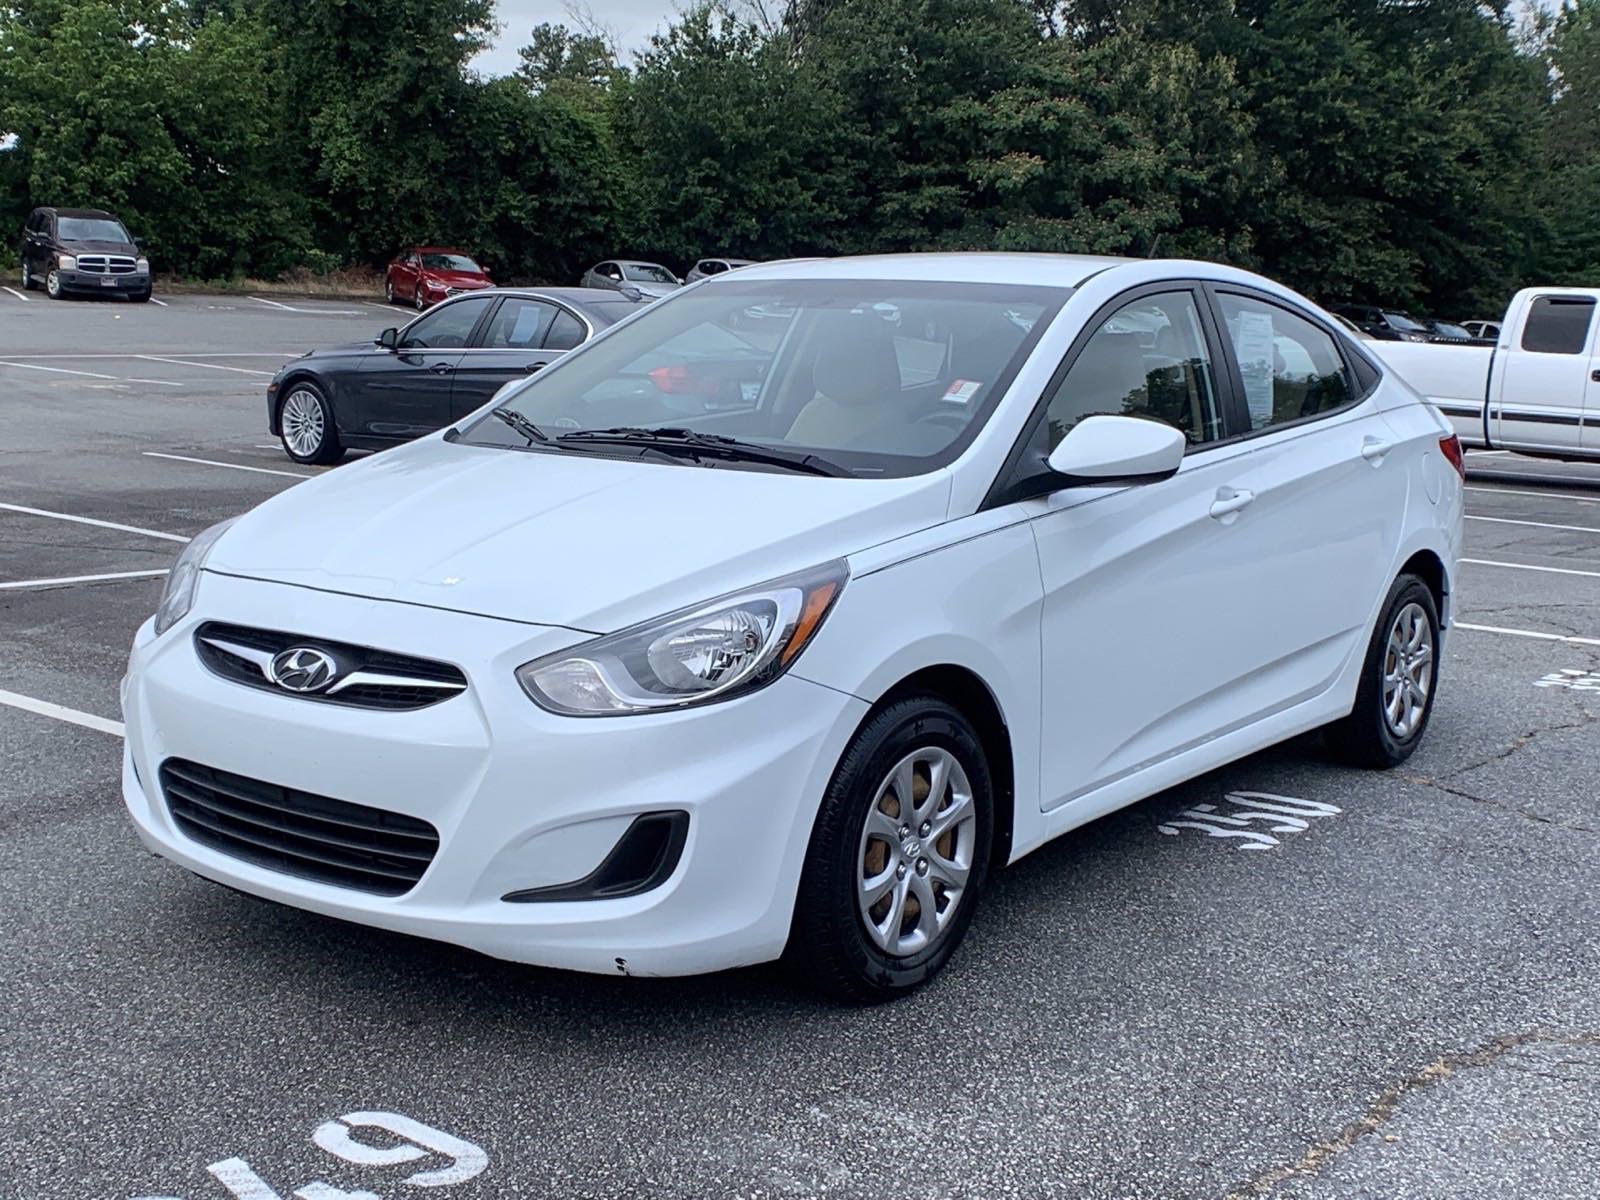 Pre-Owned 2014 Hyundai Accent GLS 4dr Car in Smyrna #287638A | Ed ...